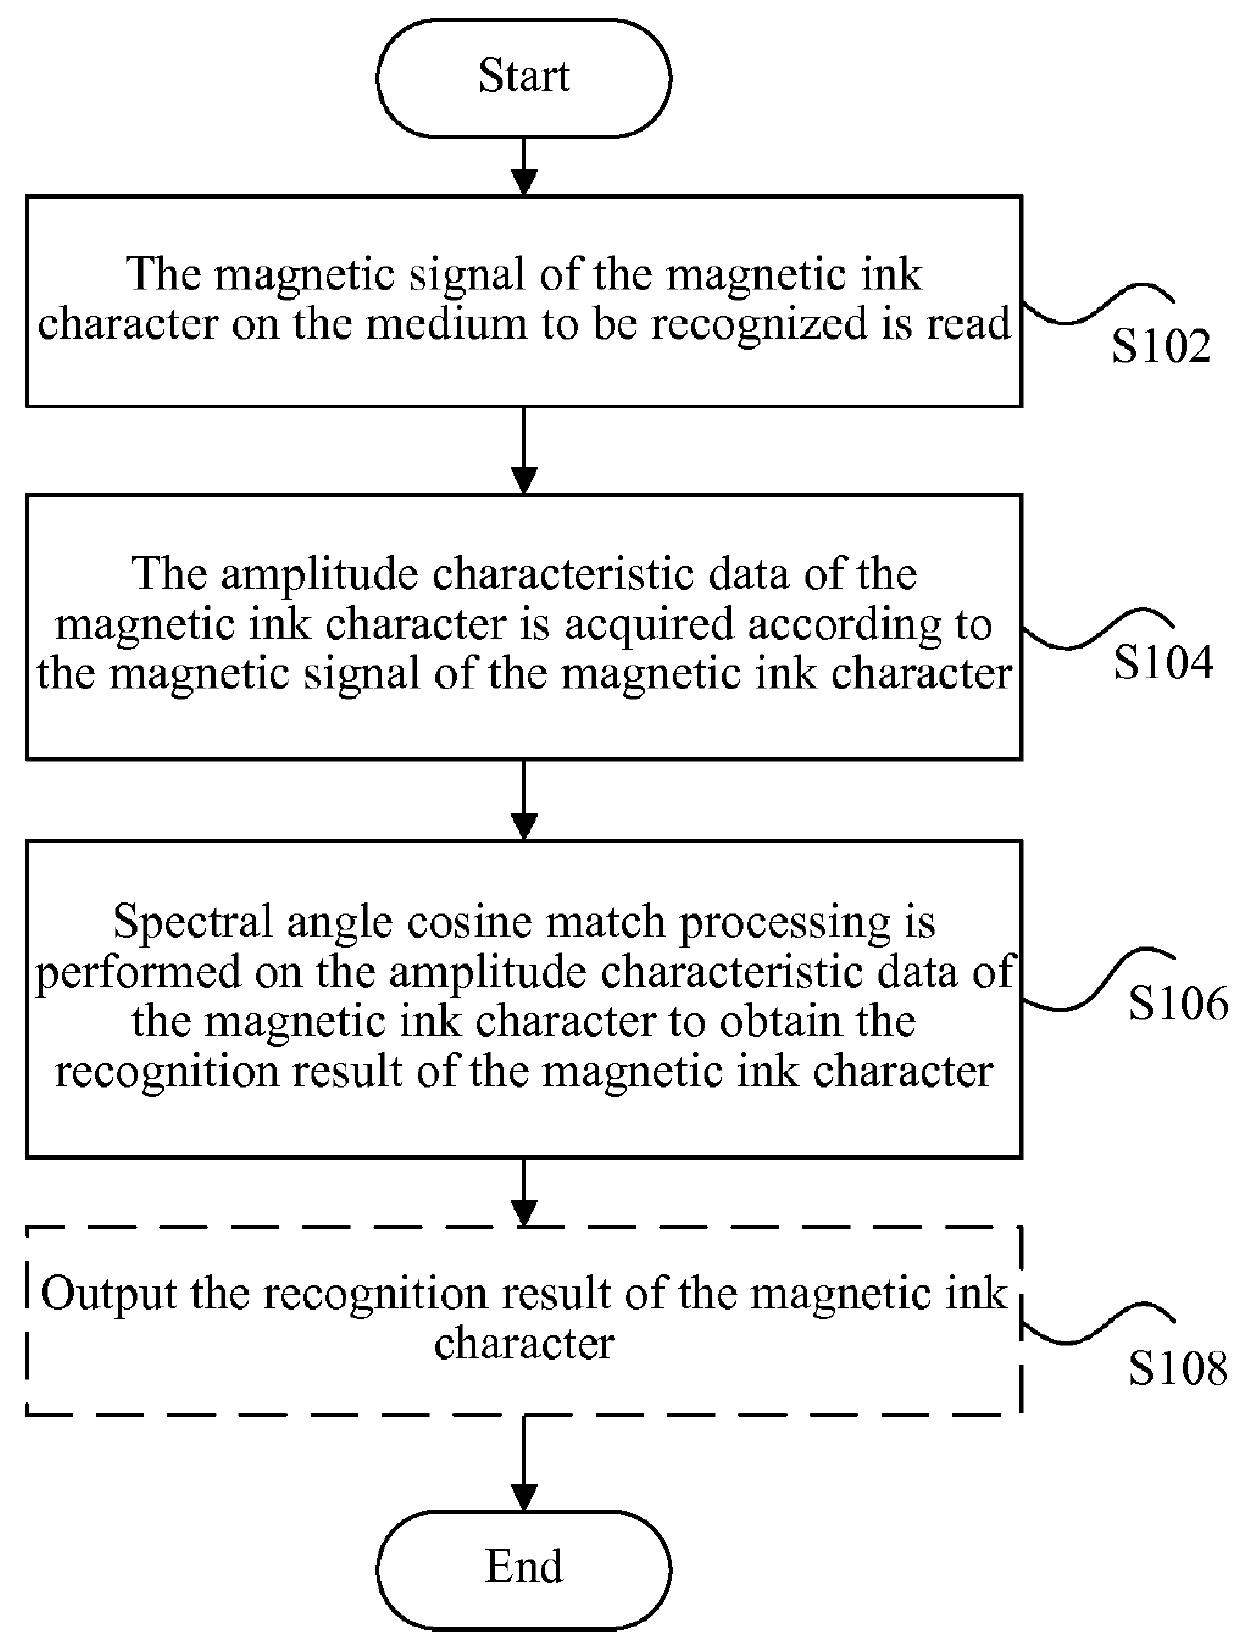 Method, apparatus and system for recognizing magnetic ink character